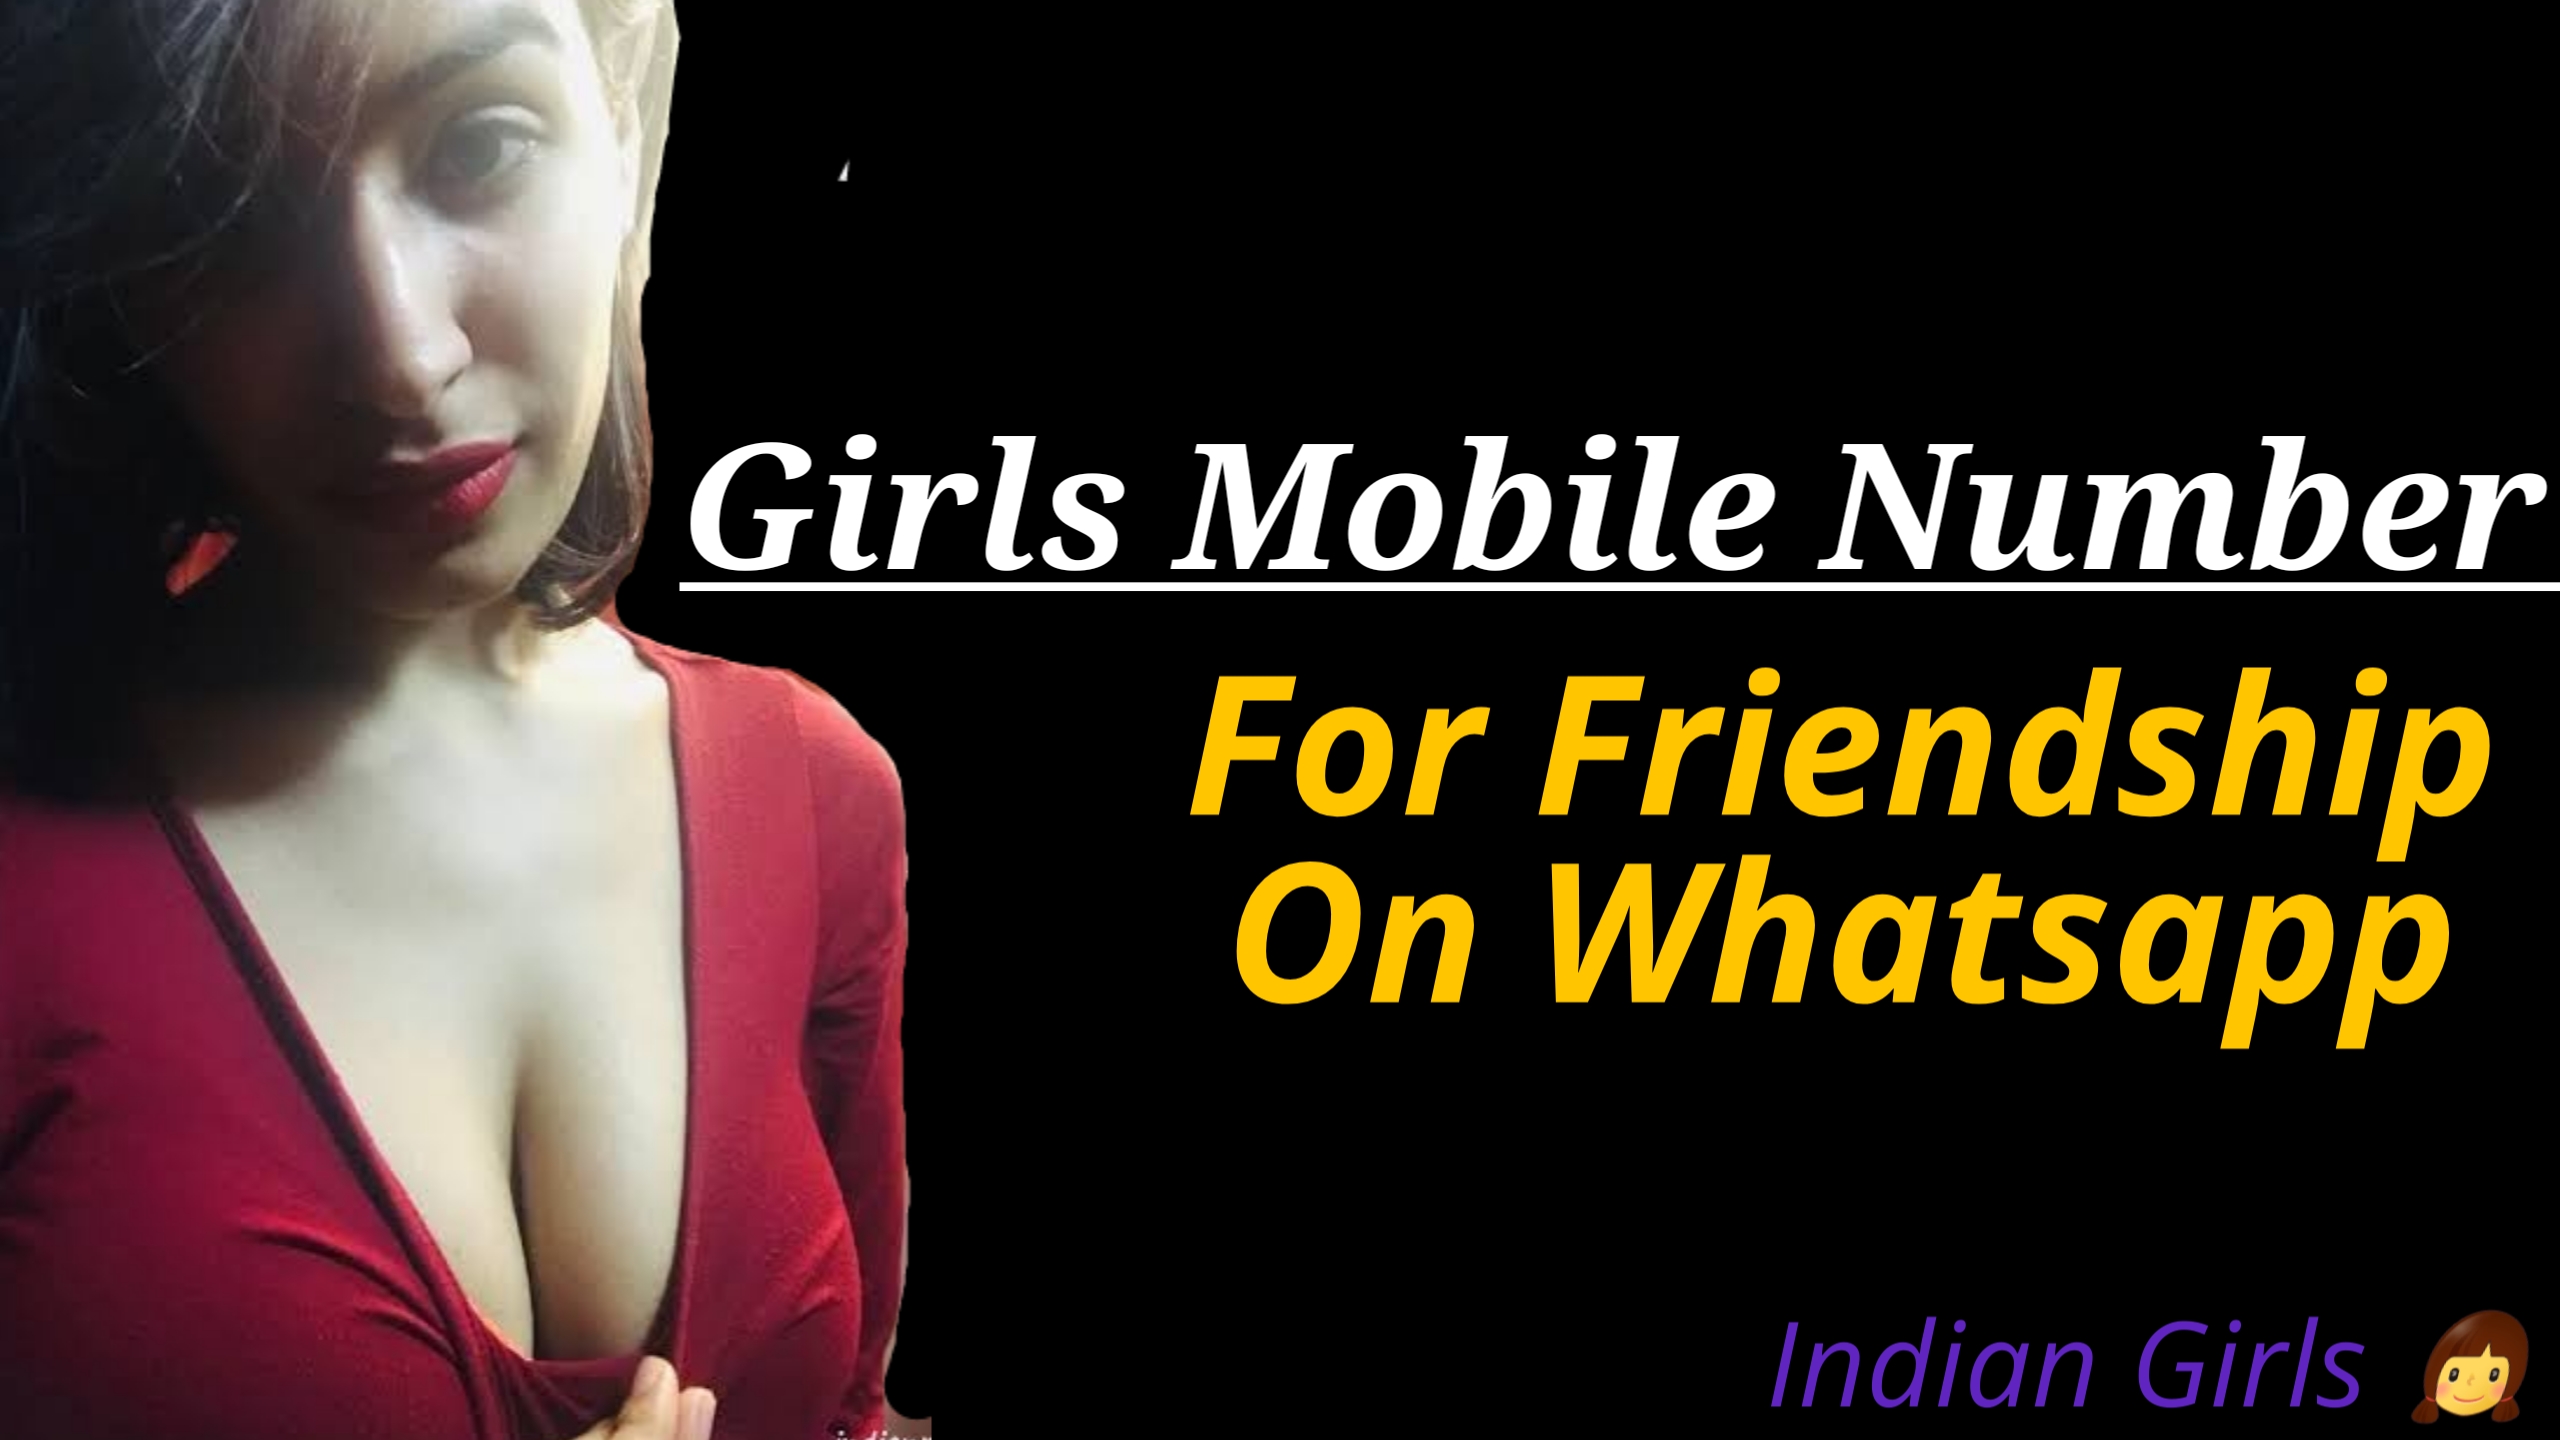 Girls Mobile Number For Friendship On Whatsapp